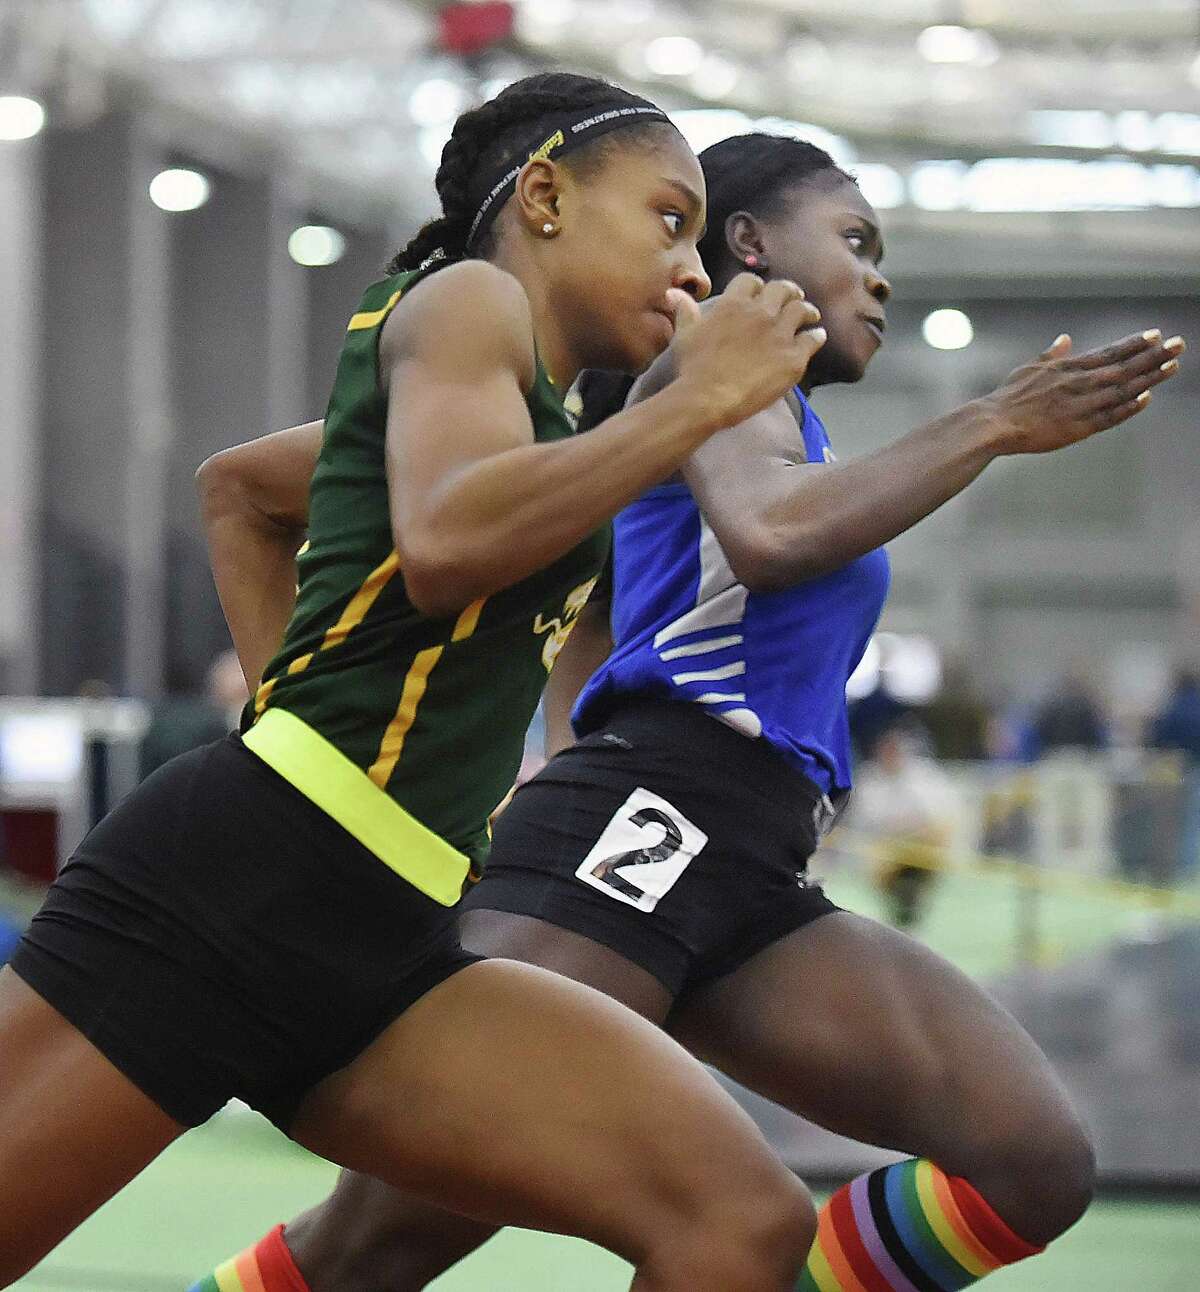 Hamden’s Aisha Gay, left, finished first in the 300 meters at the girls indoor track and field State Open Saturday in New Haven.